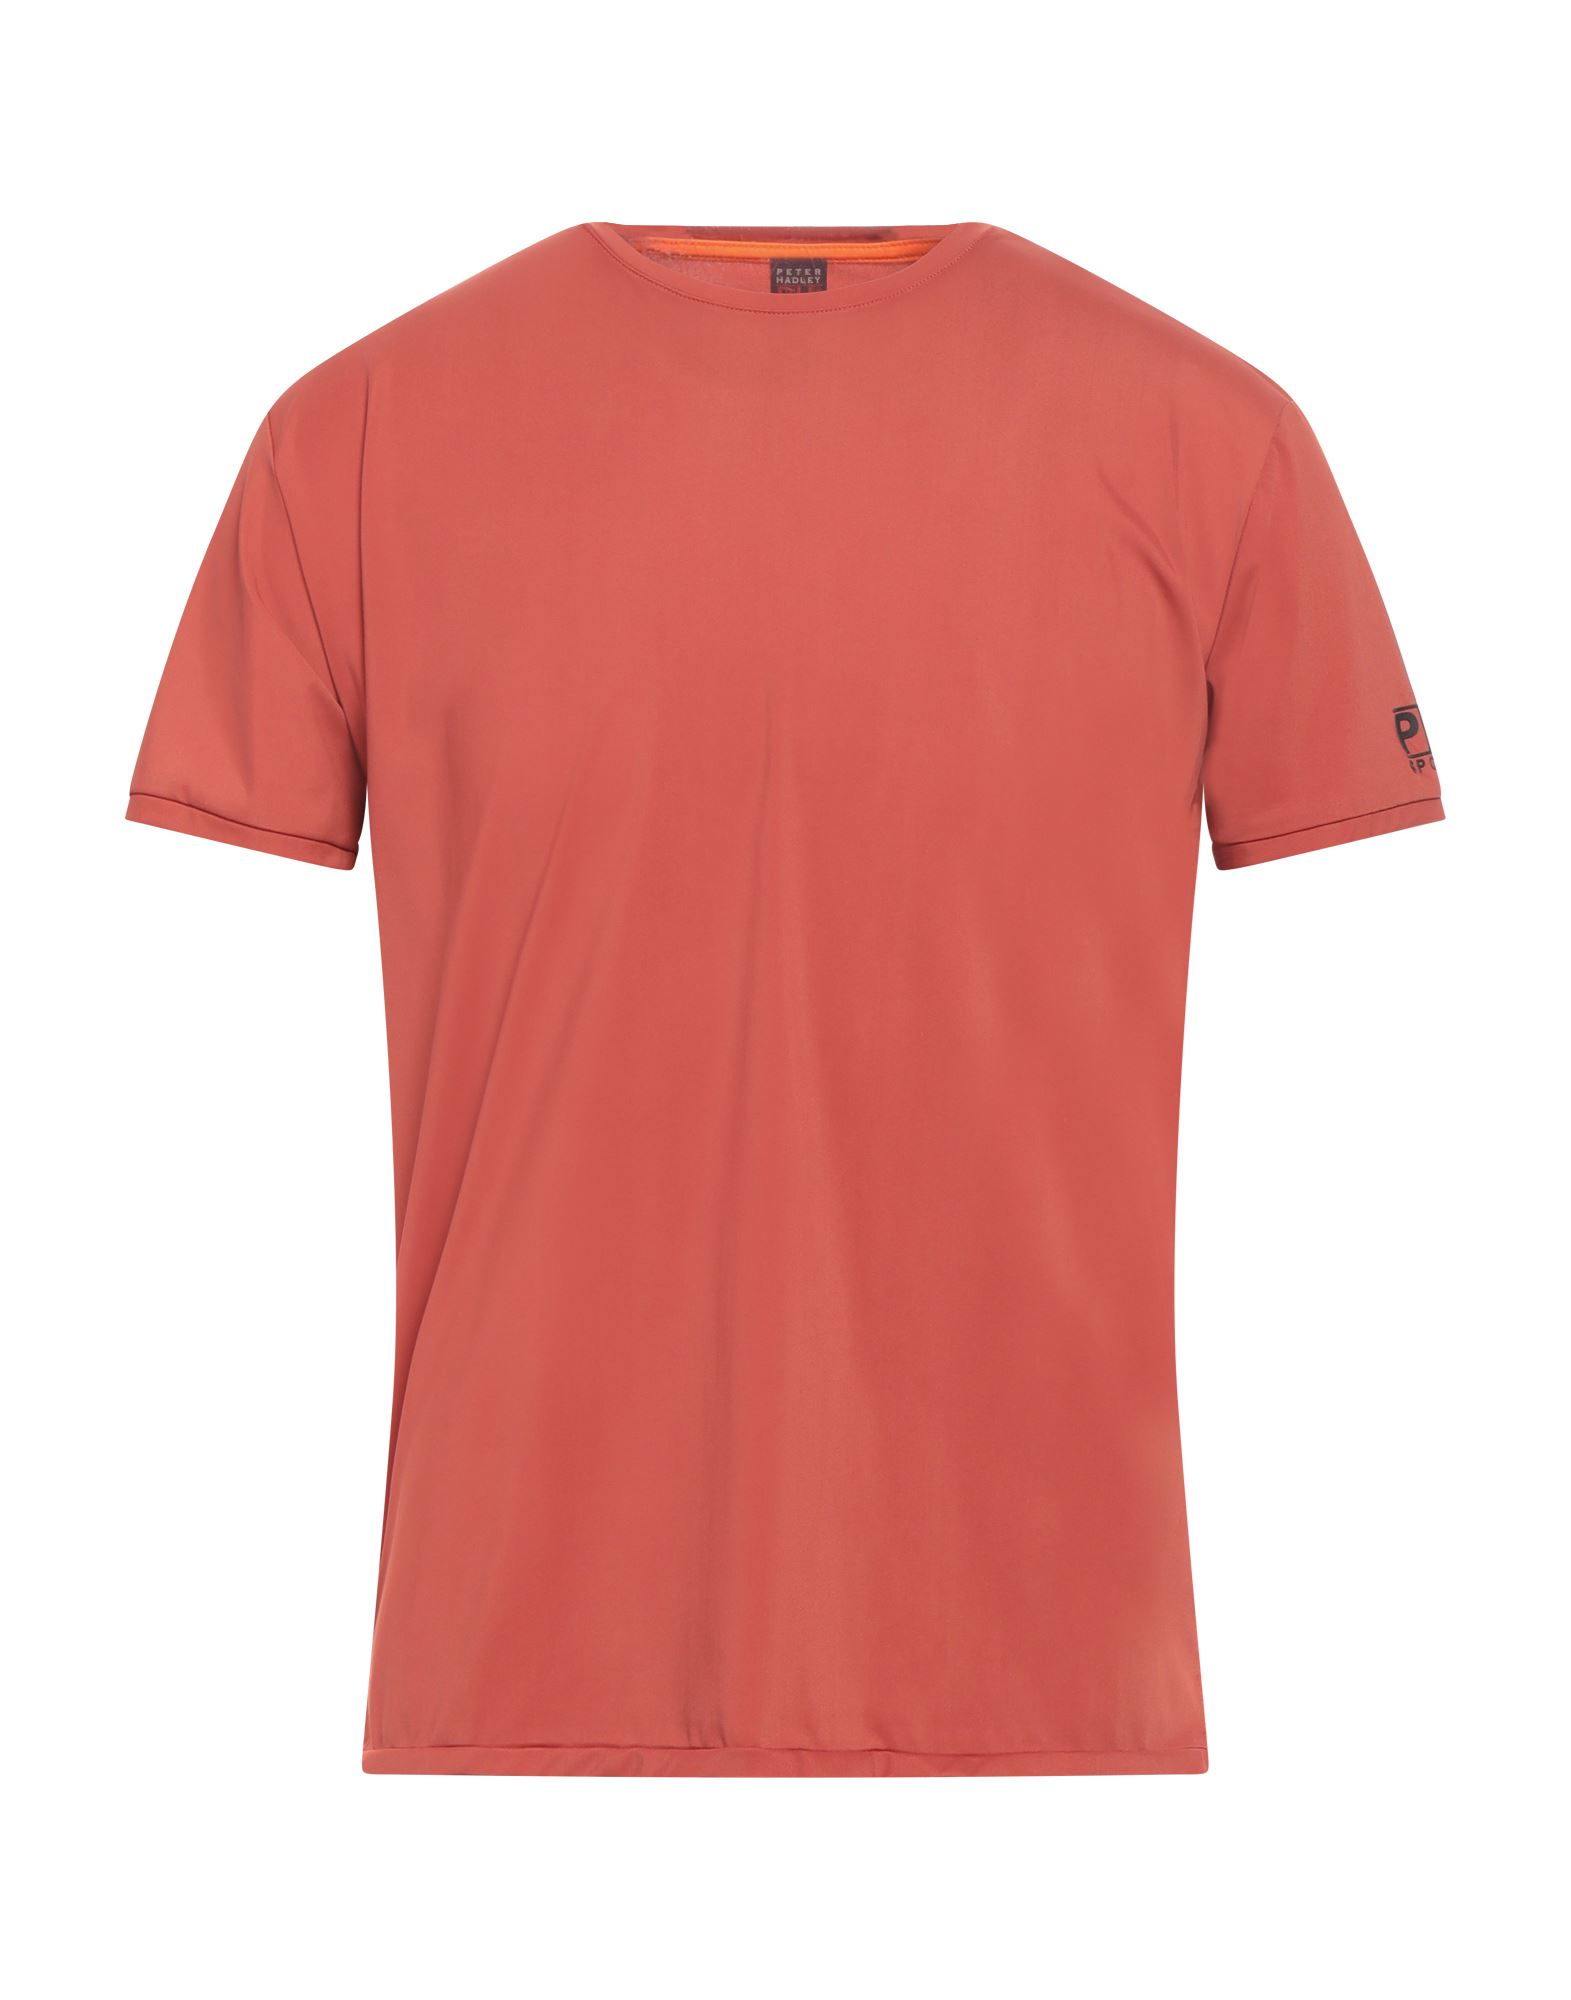 Peter Hadley Sport T-shirts In Red